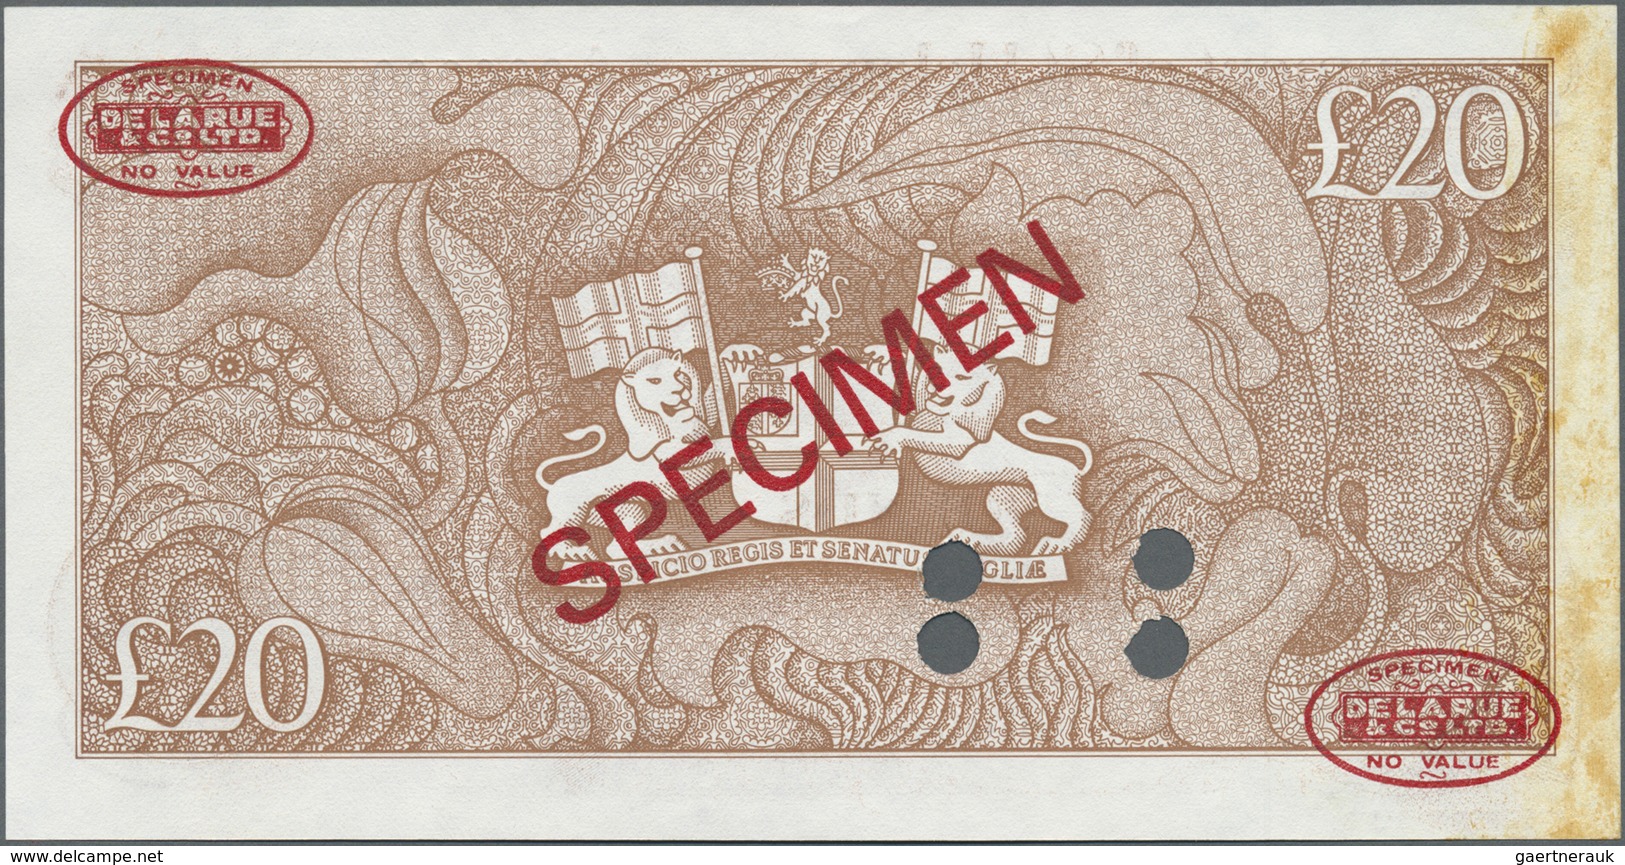 St. Helena: 20 Pounds ND(1986) Specimen P. 10s, With Zero Serial Numbers And Red Specimen Overprint, - Saint Helena Island